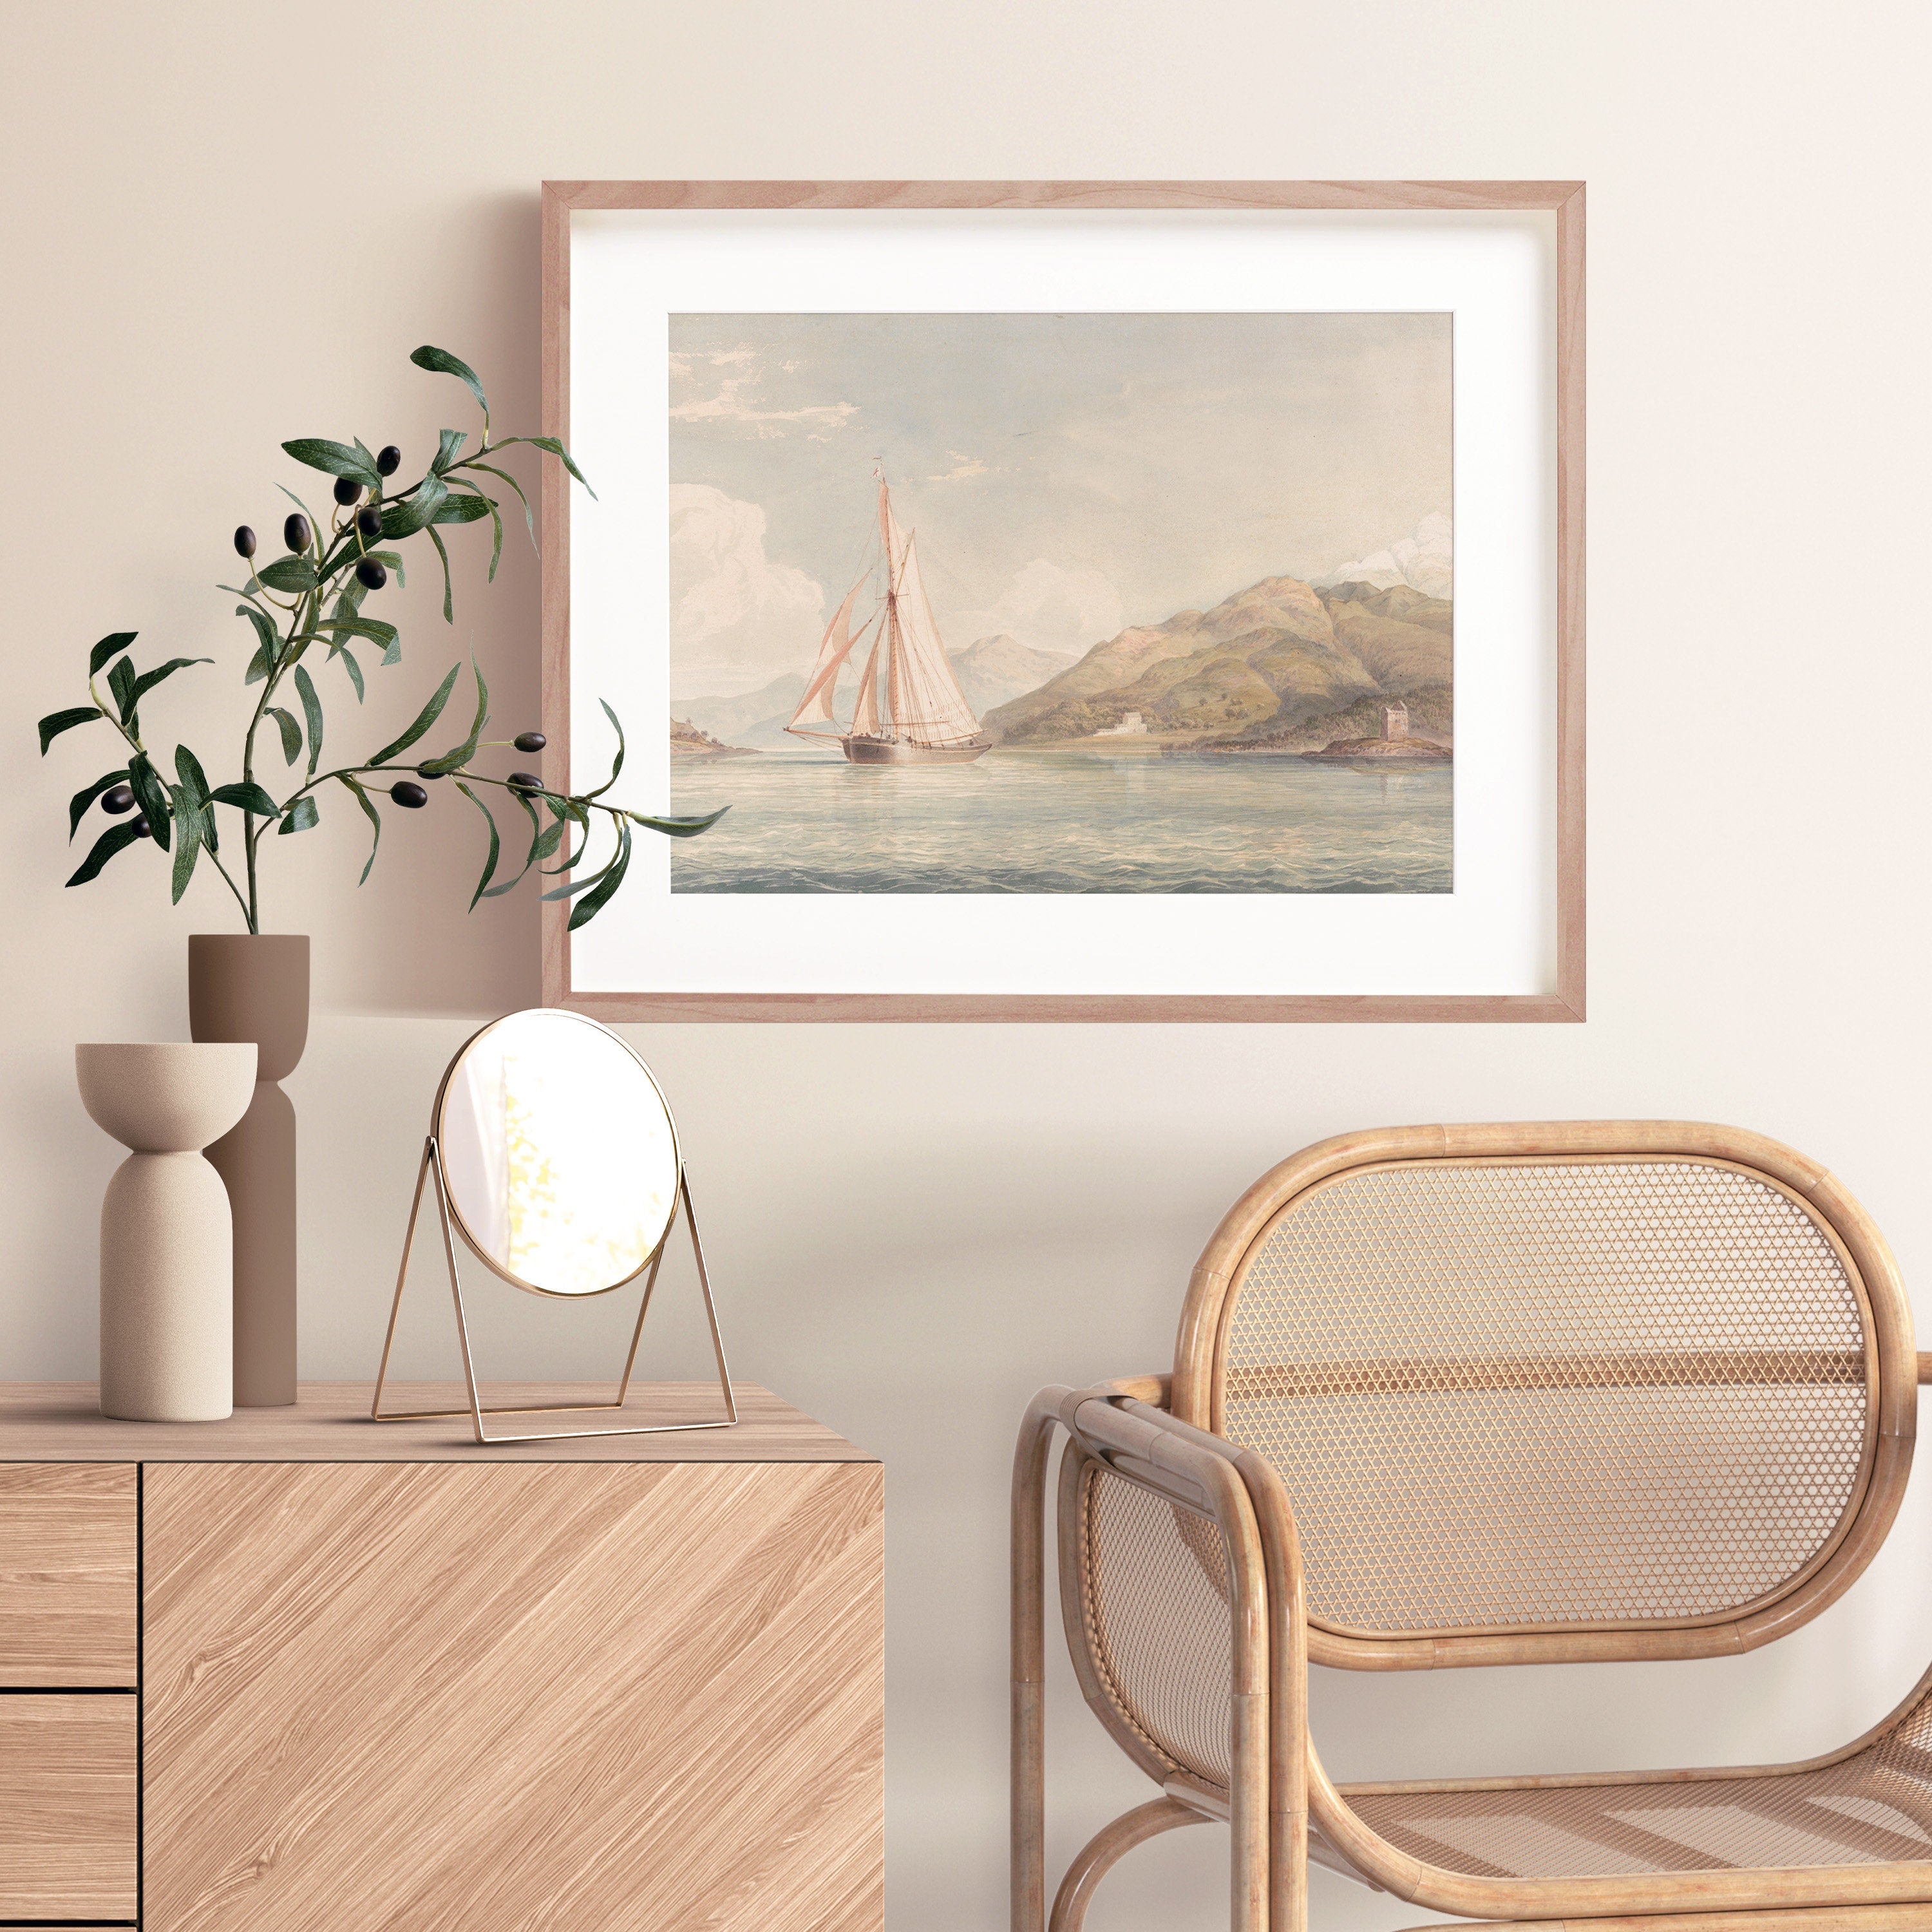 A fine art Poster "Boat Sailing to the Left with Mountains in the Background" from the British artist John Christian Schetky.  Digitally remastered for an ultra-high resolution.